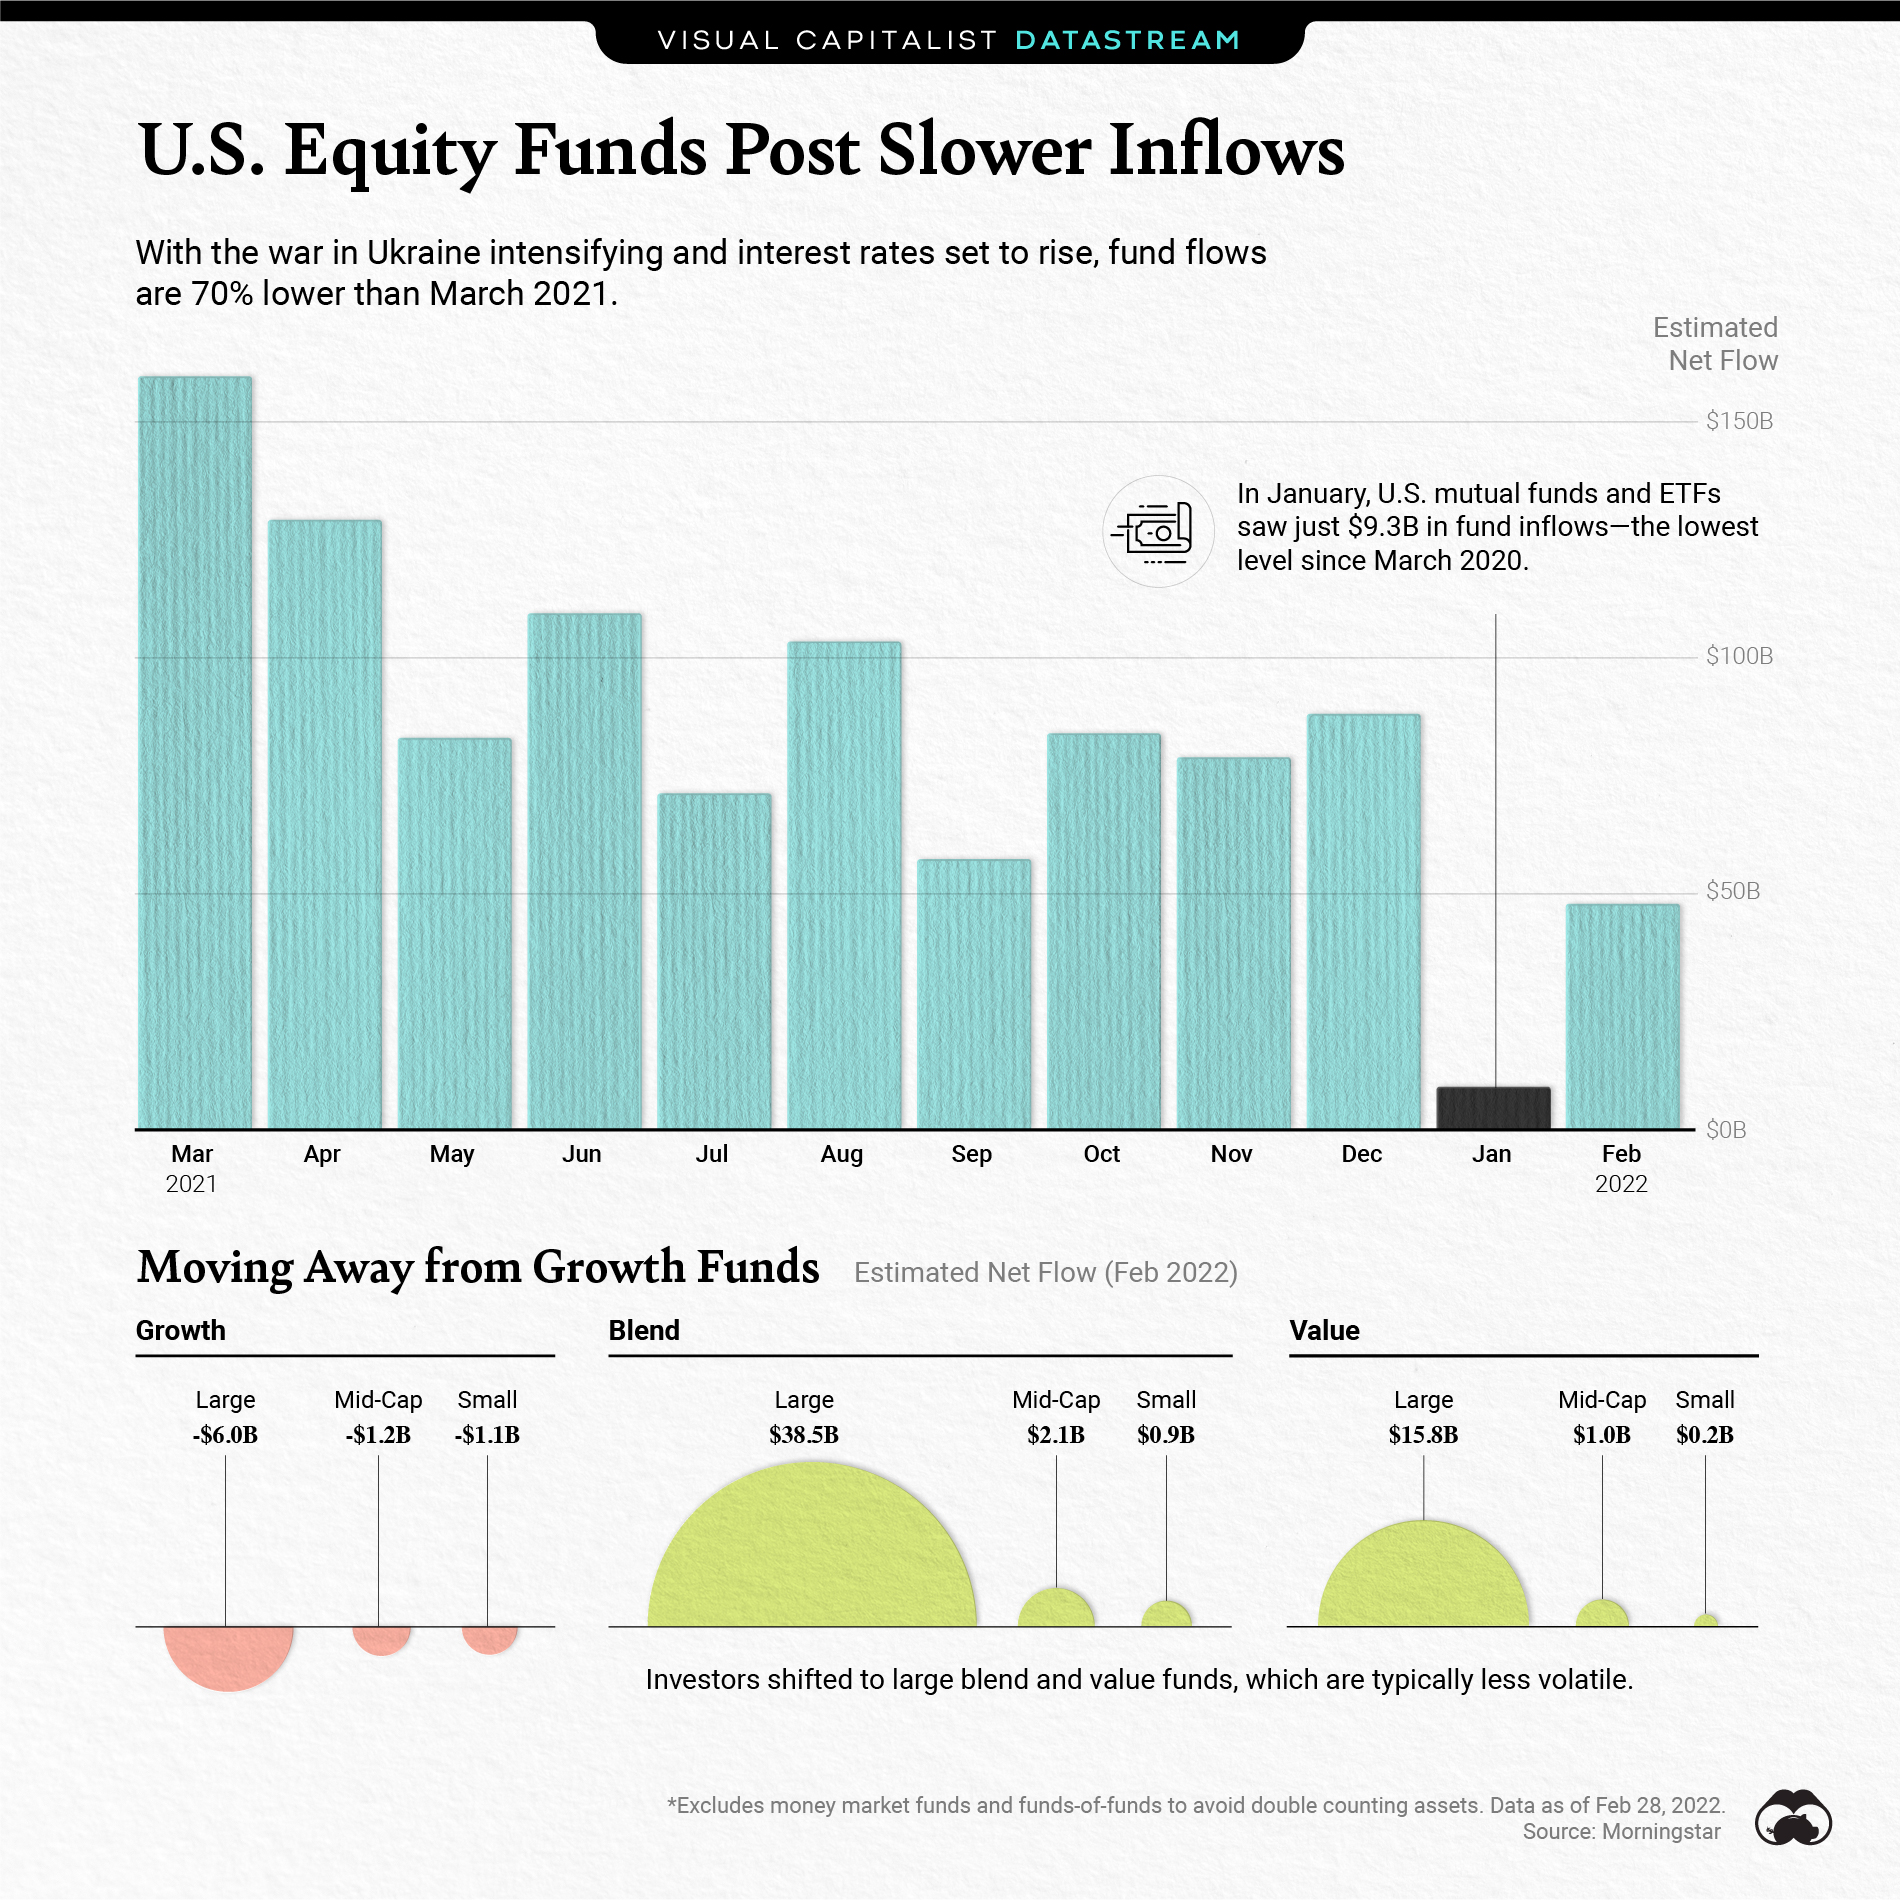 U.S. Equity Funds Post Slower Inflows - Visual Capitalist